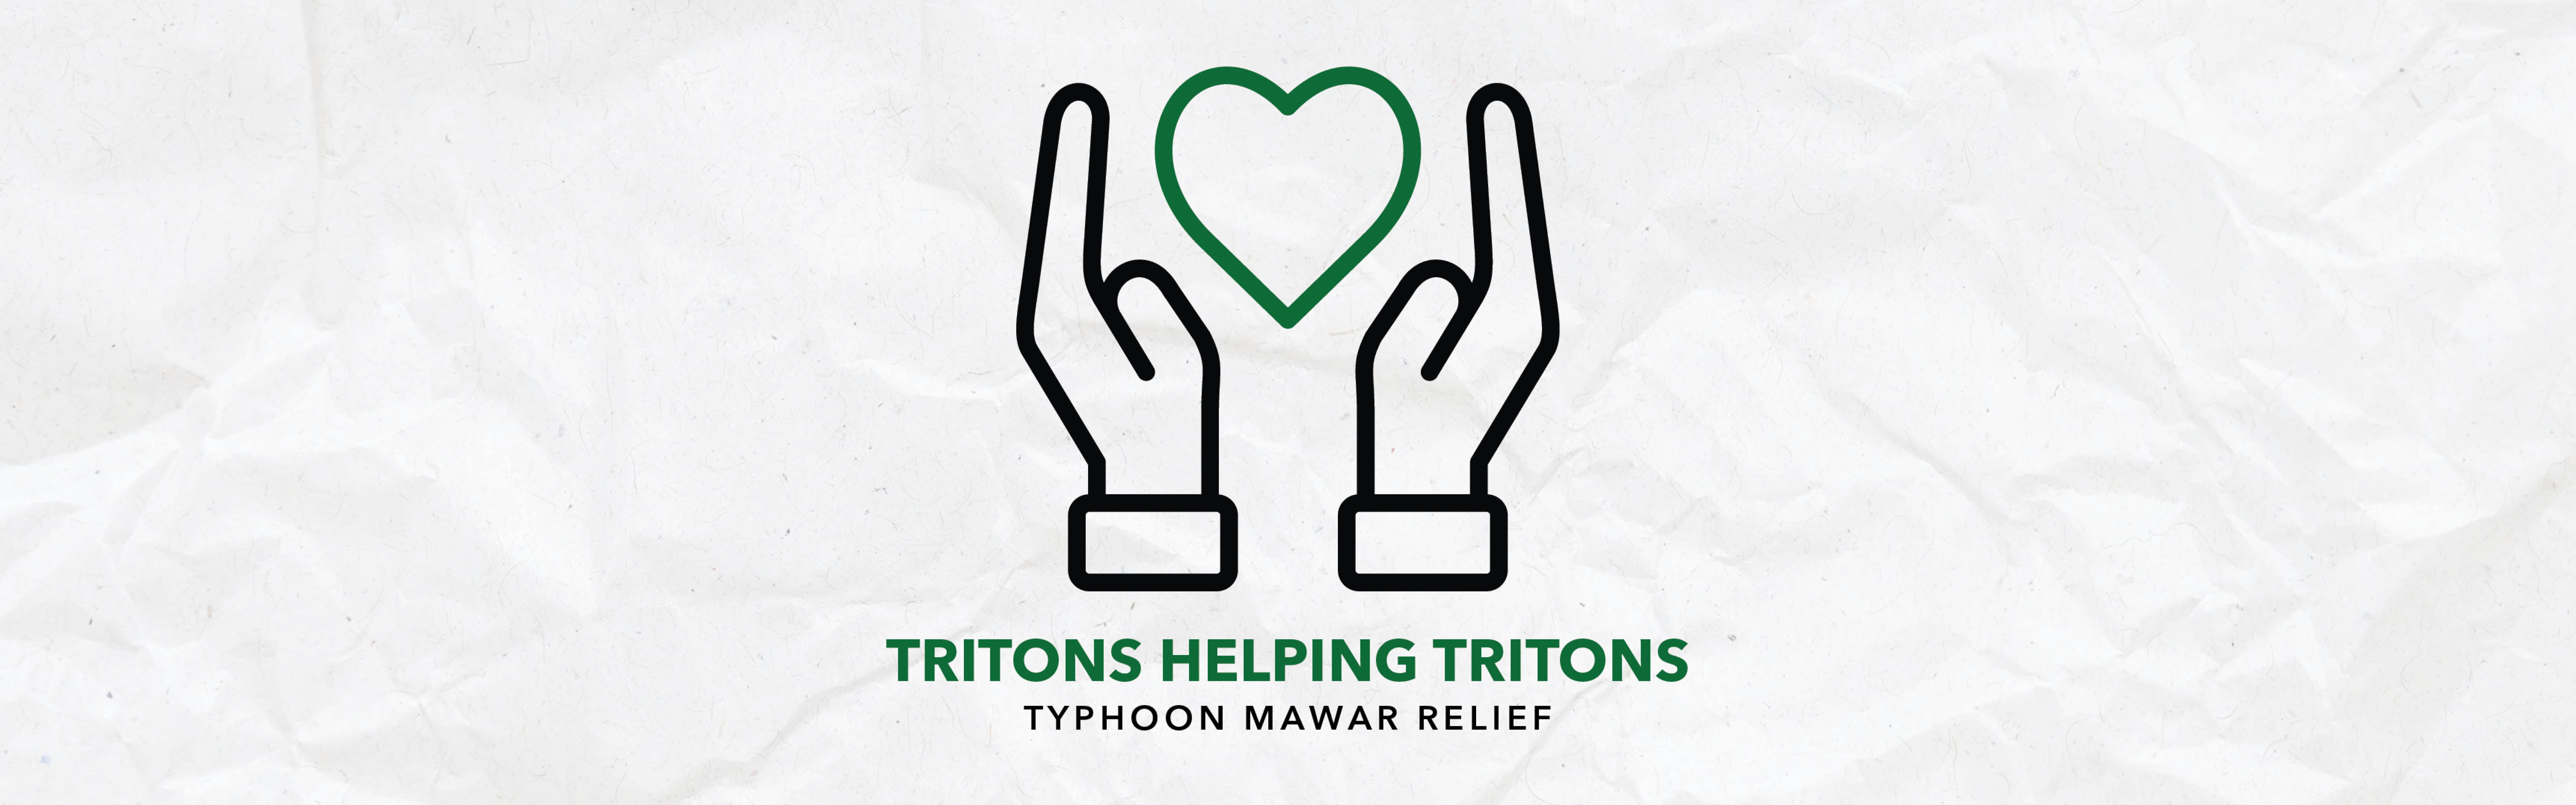 Tritons Helping Tritons: Typhoon Mawar Relief